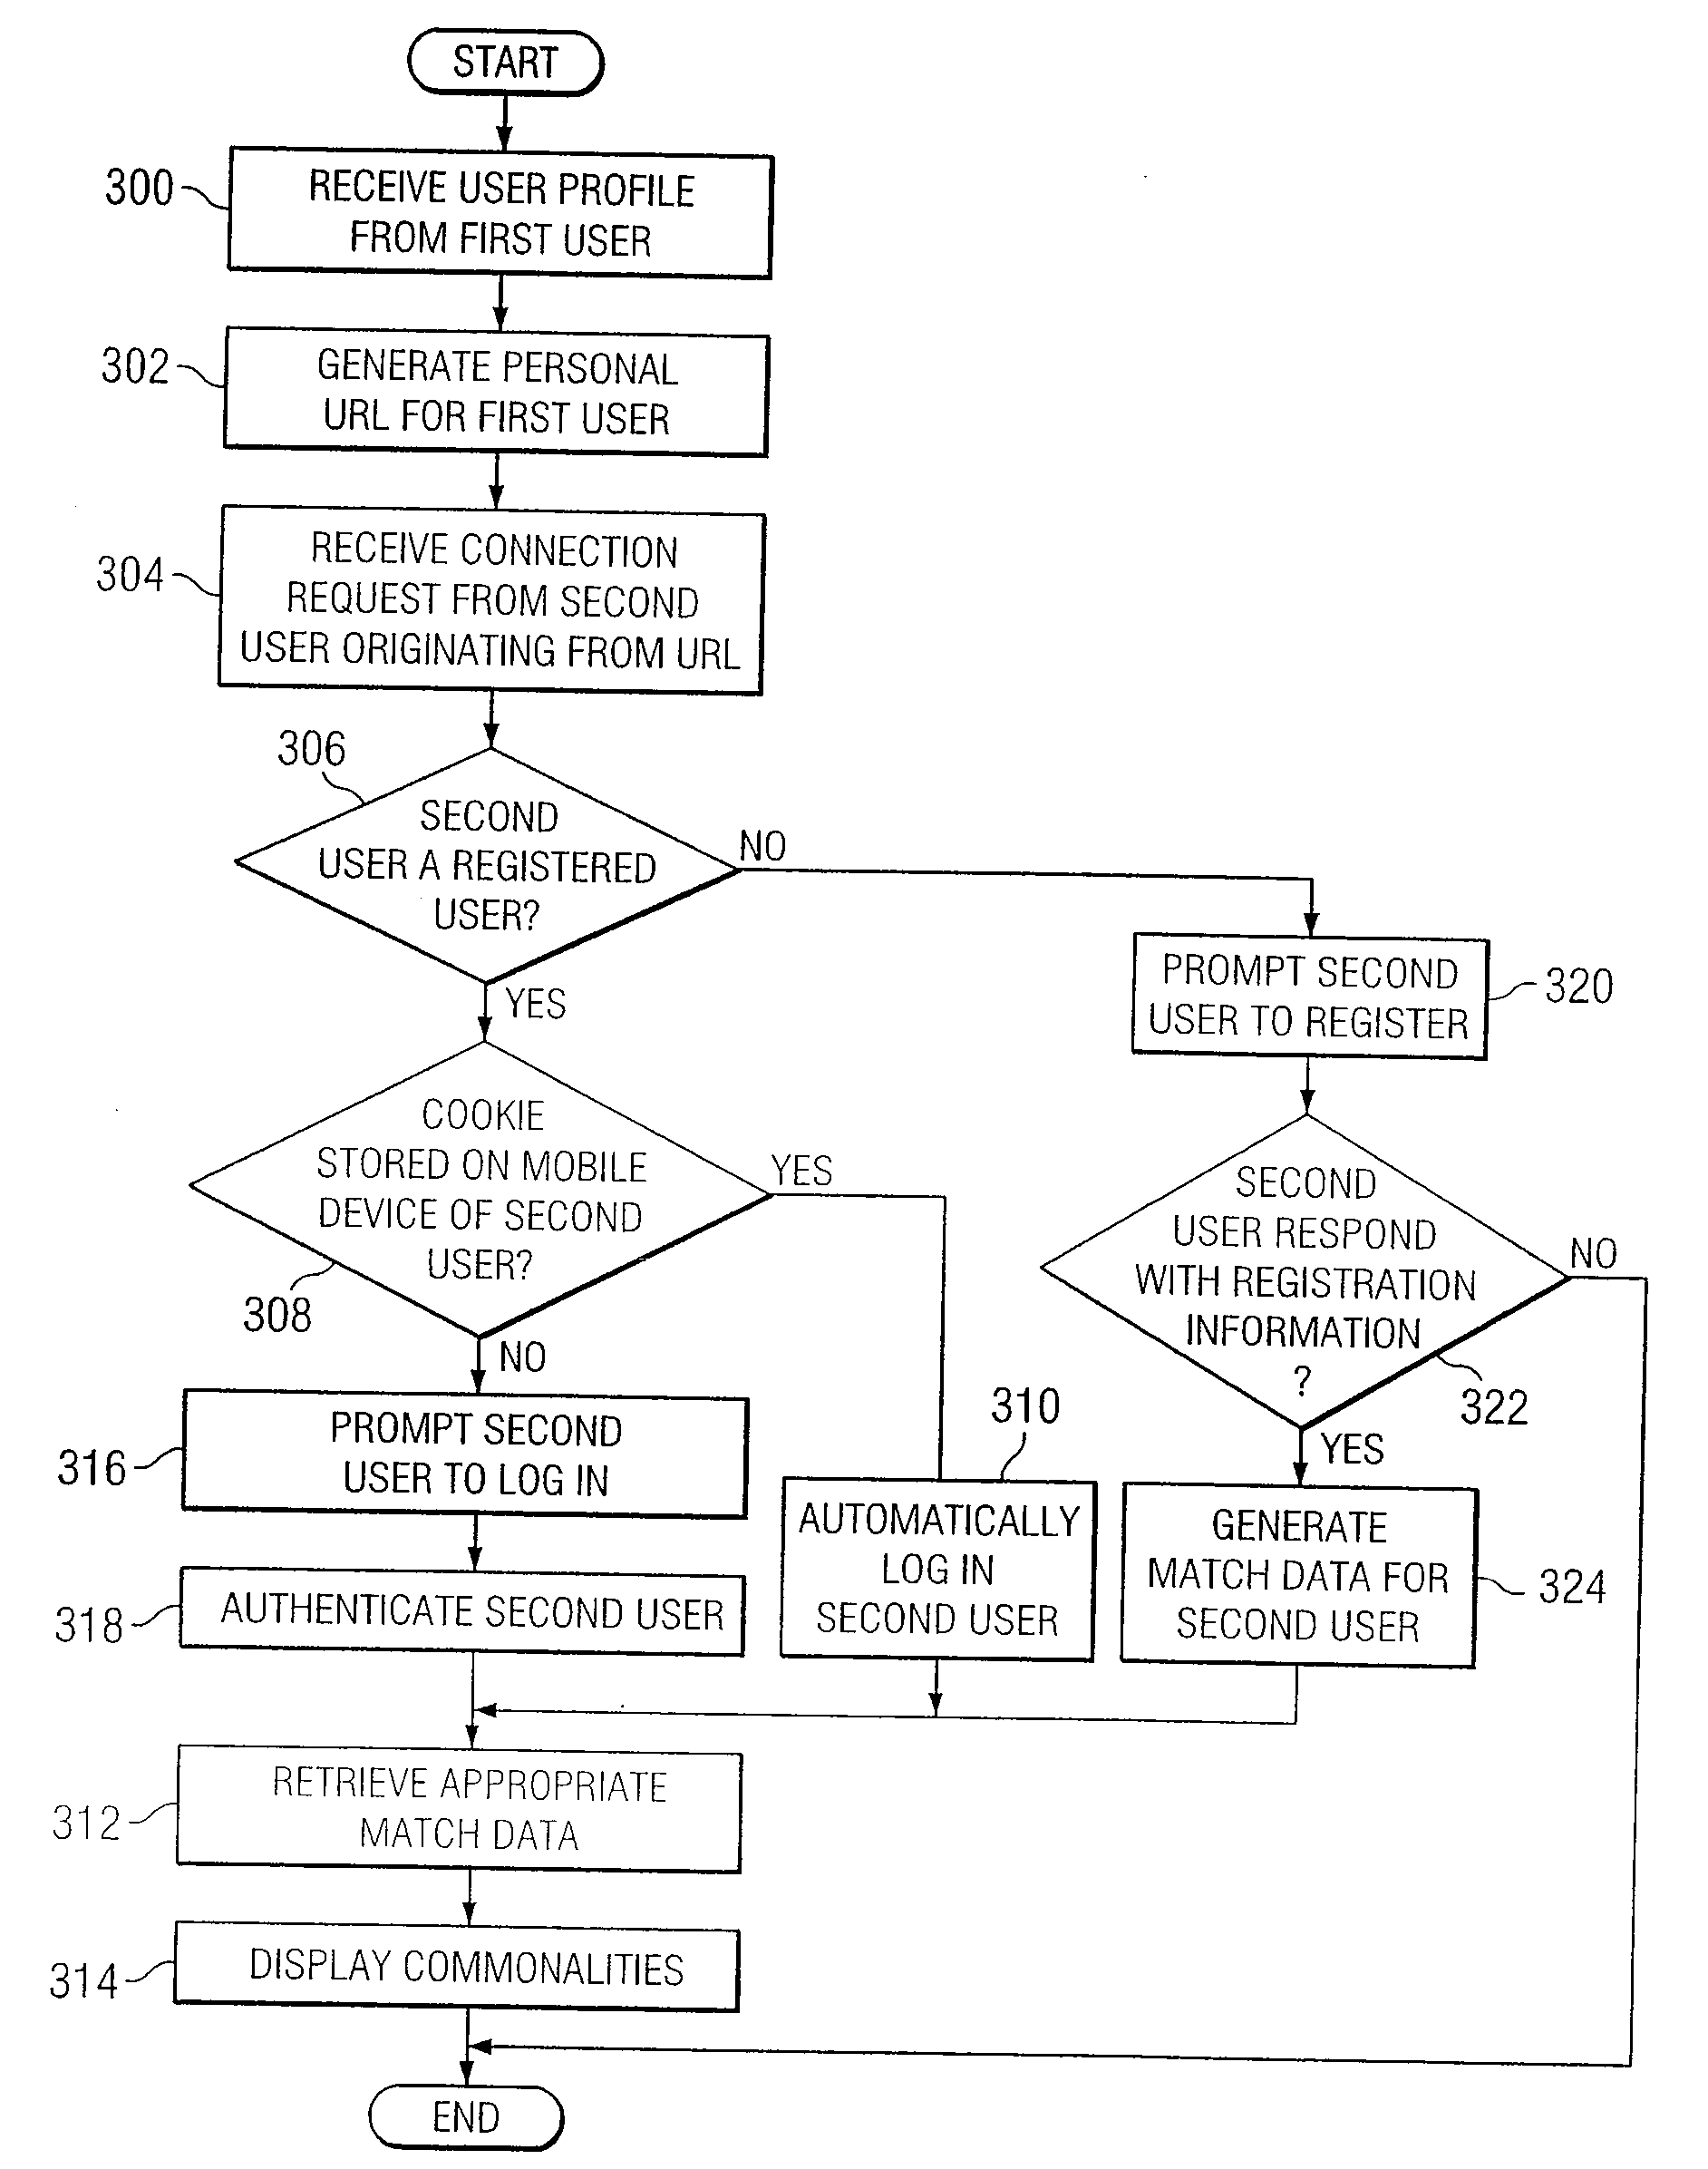 System and method for providing communication services to mobile device users incorporating proximity determination